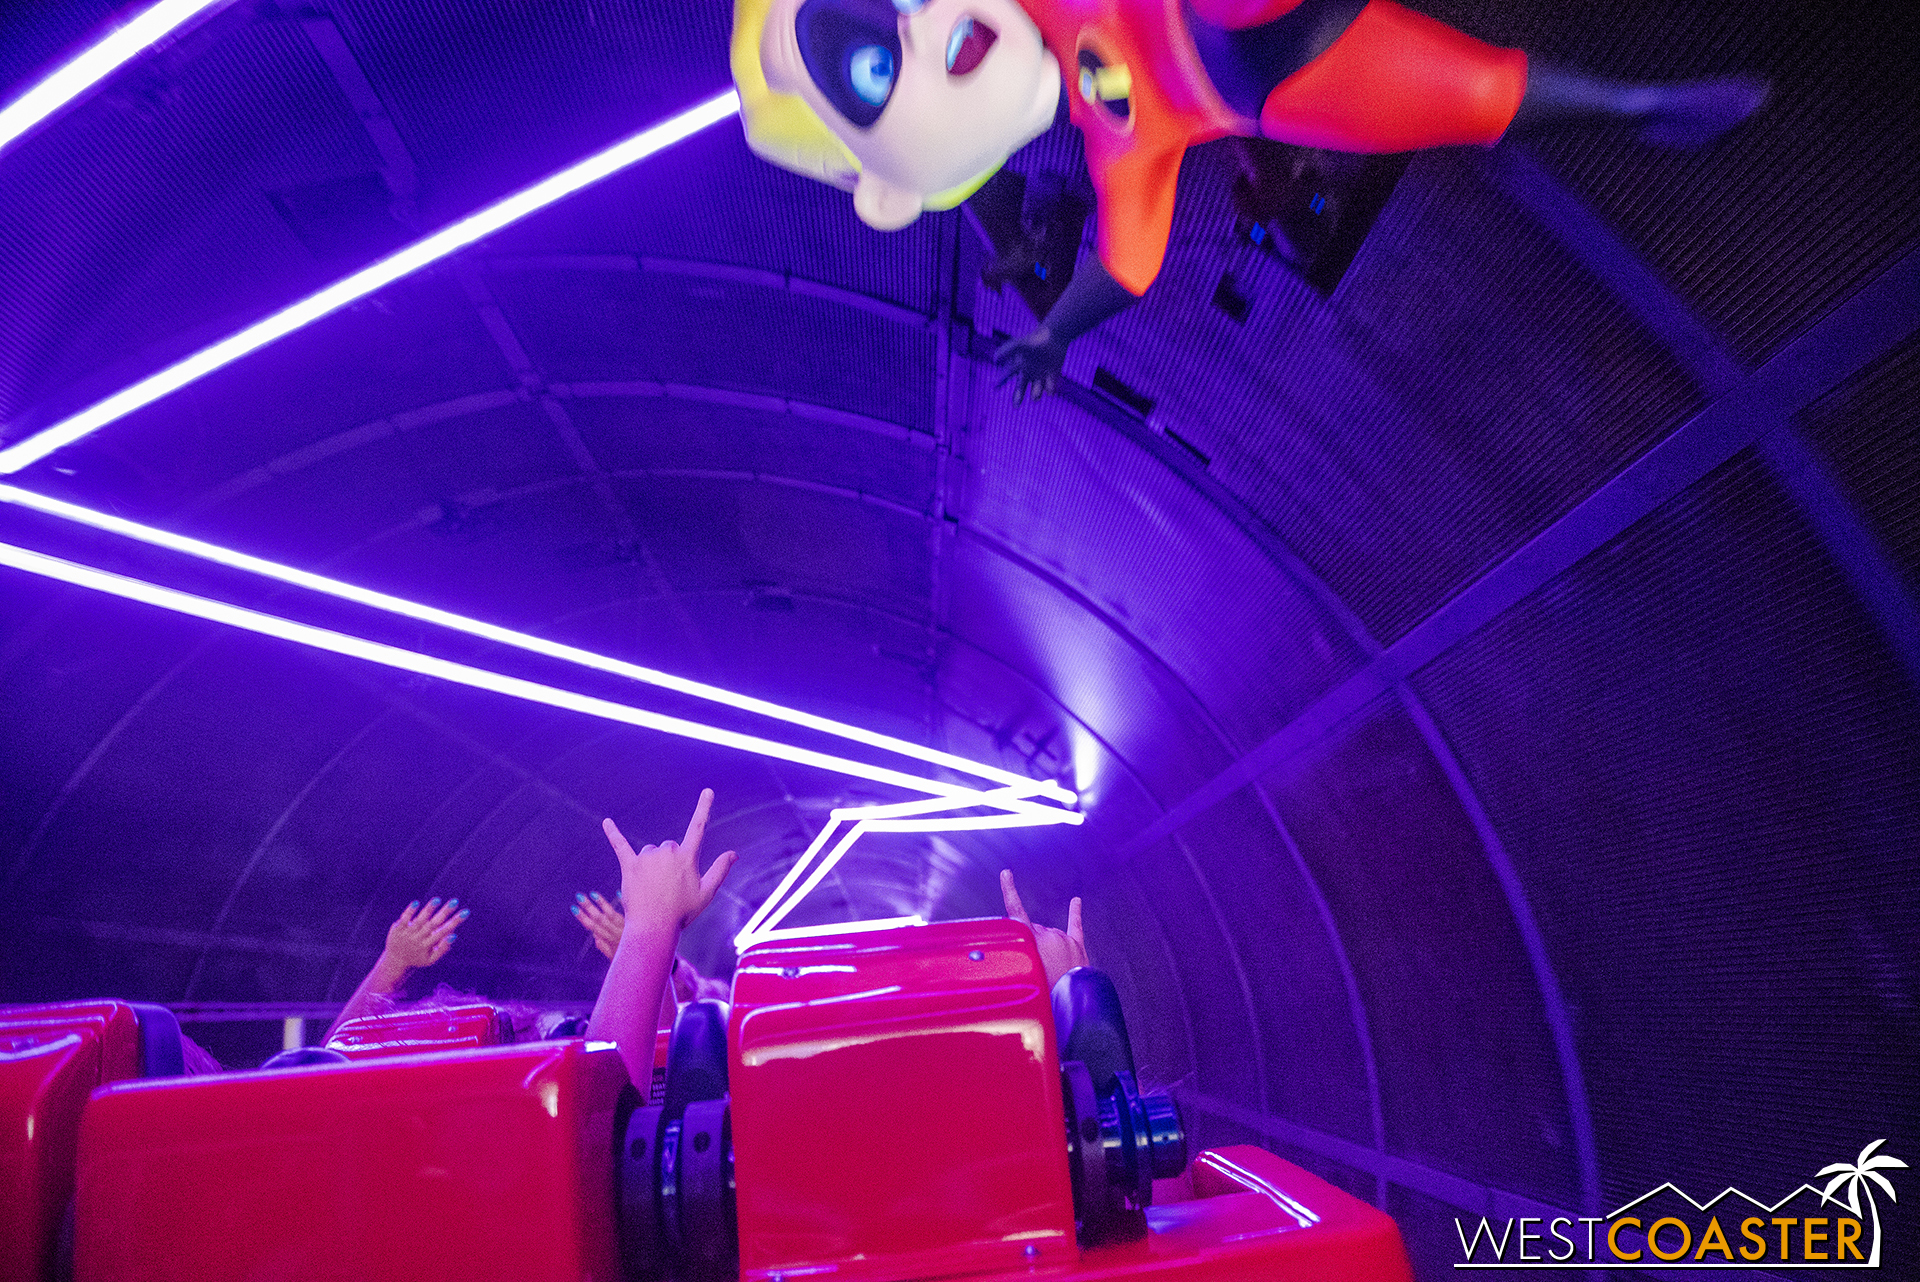  We launch into the first scream tunnel and find Jack Jack shooting lasers. 